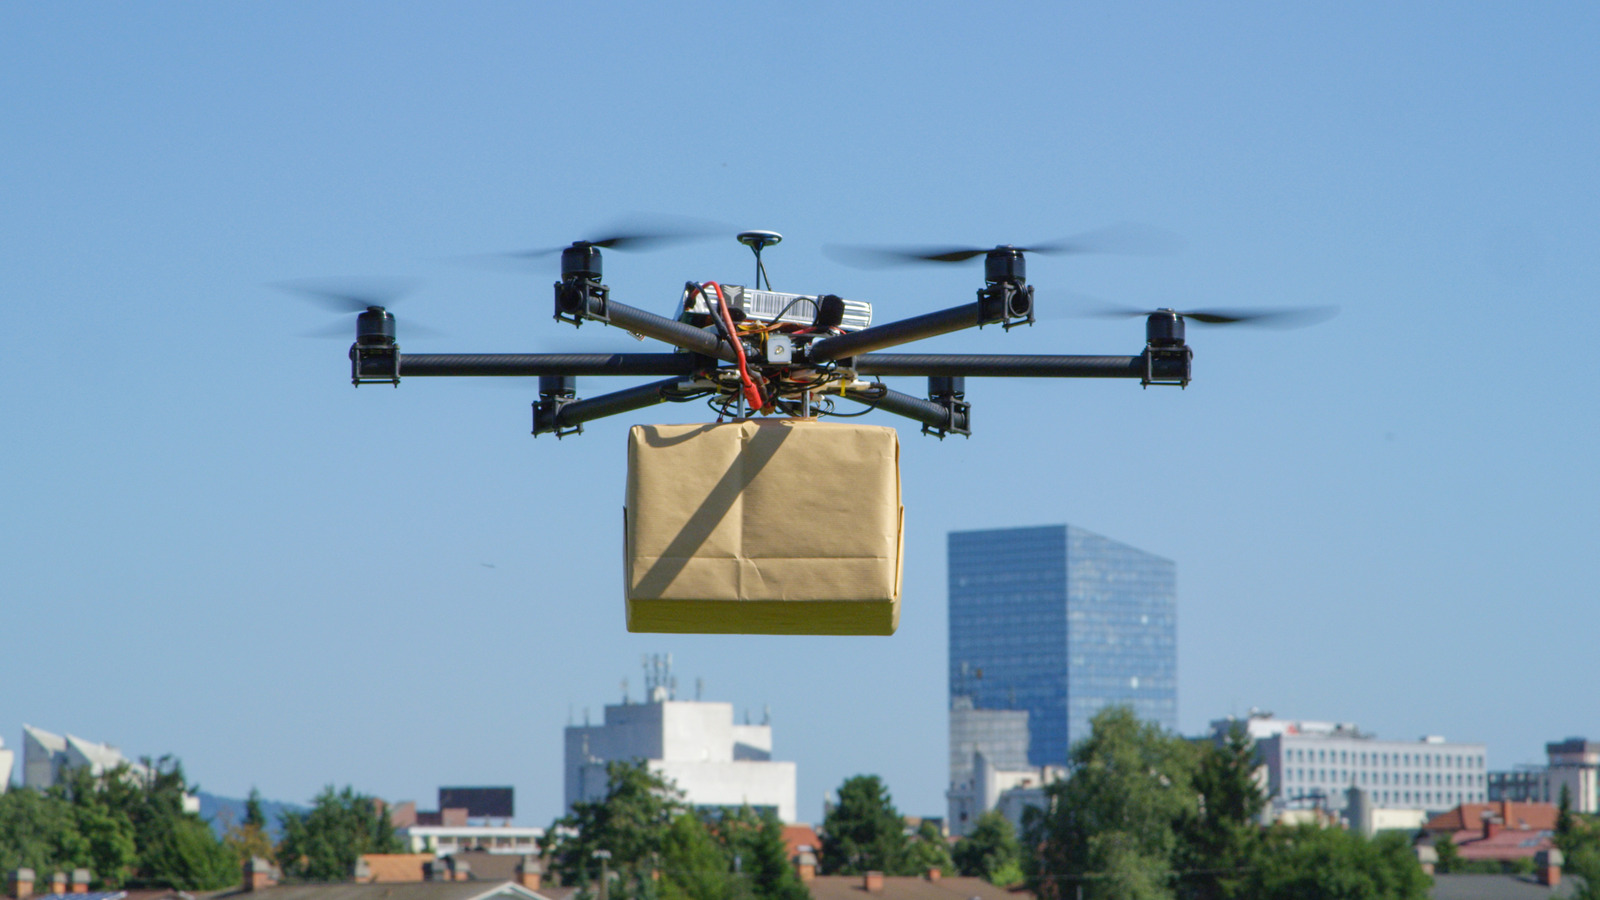 Baron nedbrydes dart Food Delivery Via Drone Continues To Gain Momentum